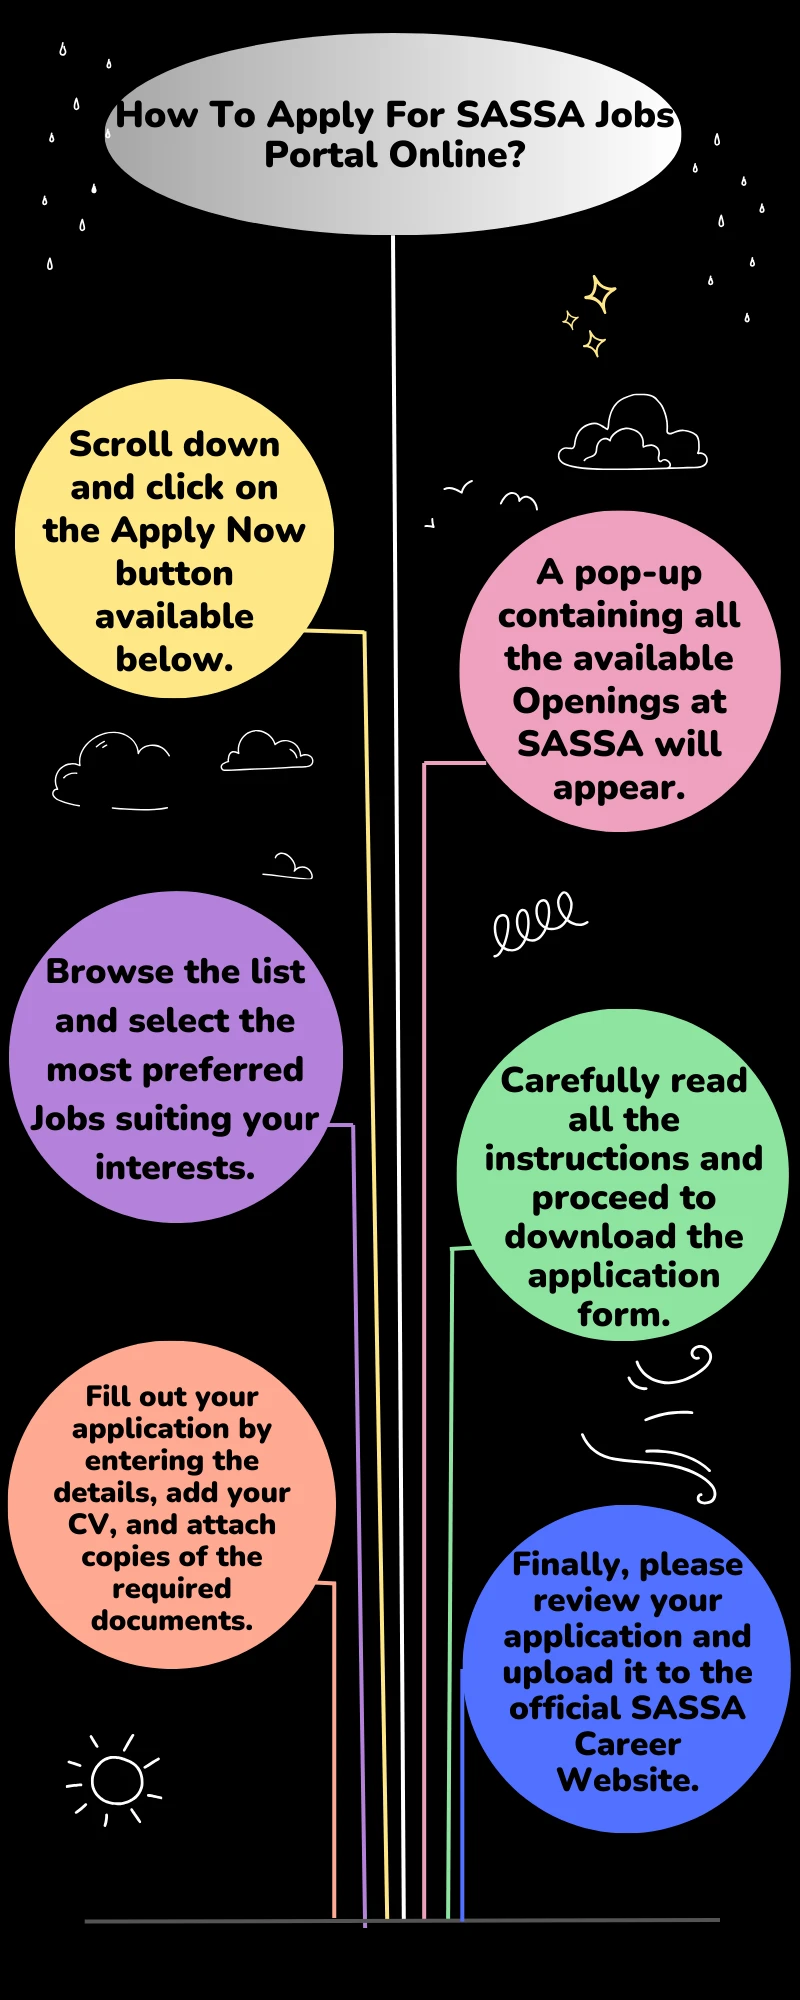 How To Apply For SASSA Jobs Portal Online?